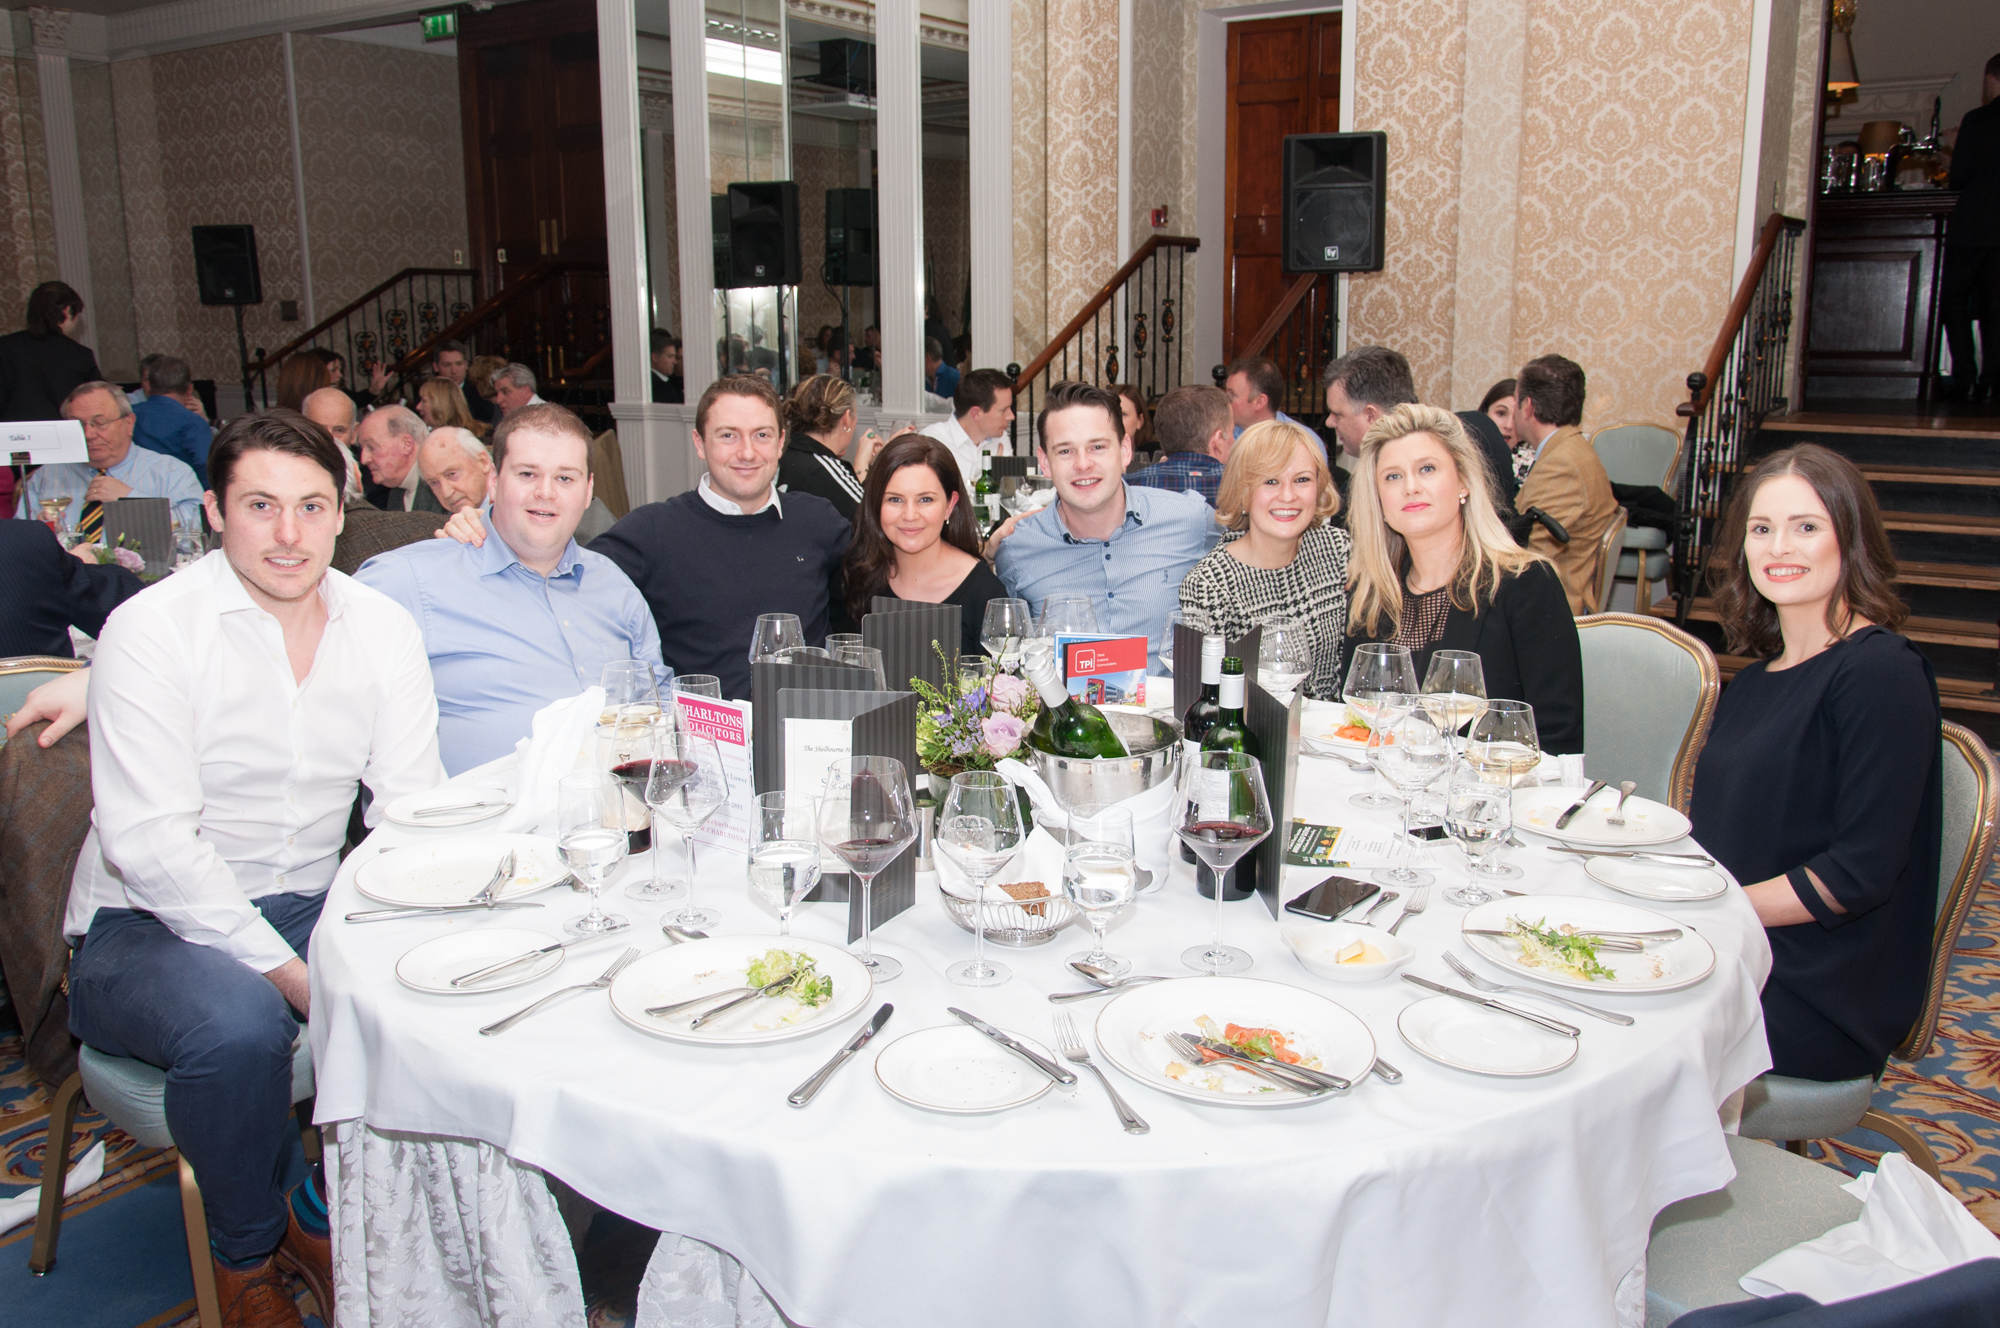 St Gerard's School Past Pupils Union Lunch at Shelbourne Hotel by Natalia Marzec_ low res165